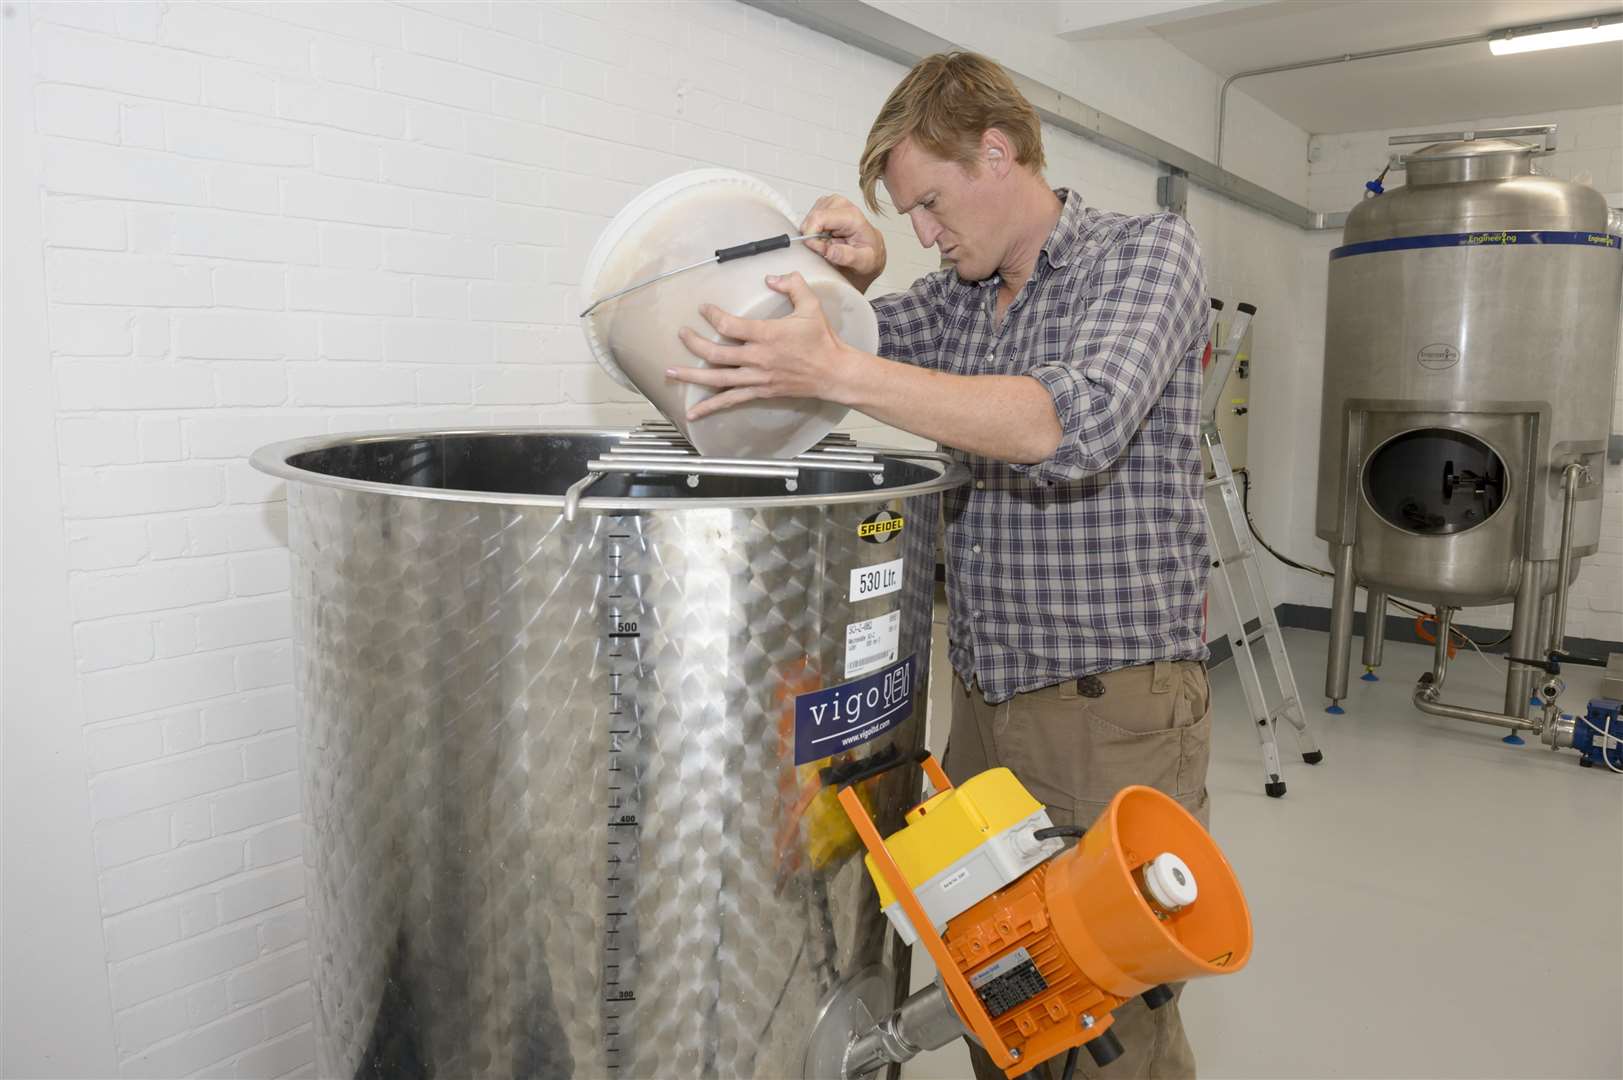 Will pouring honey into the mixing tank